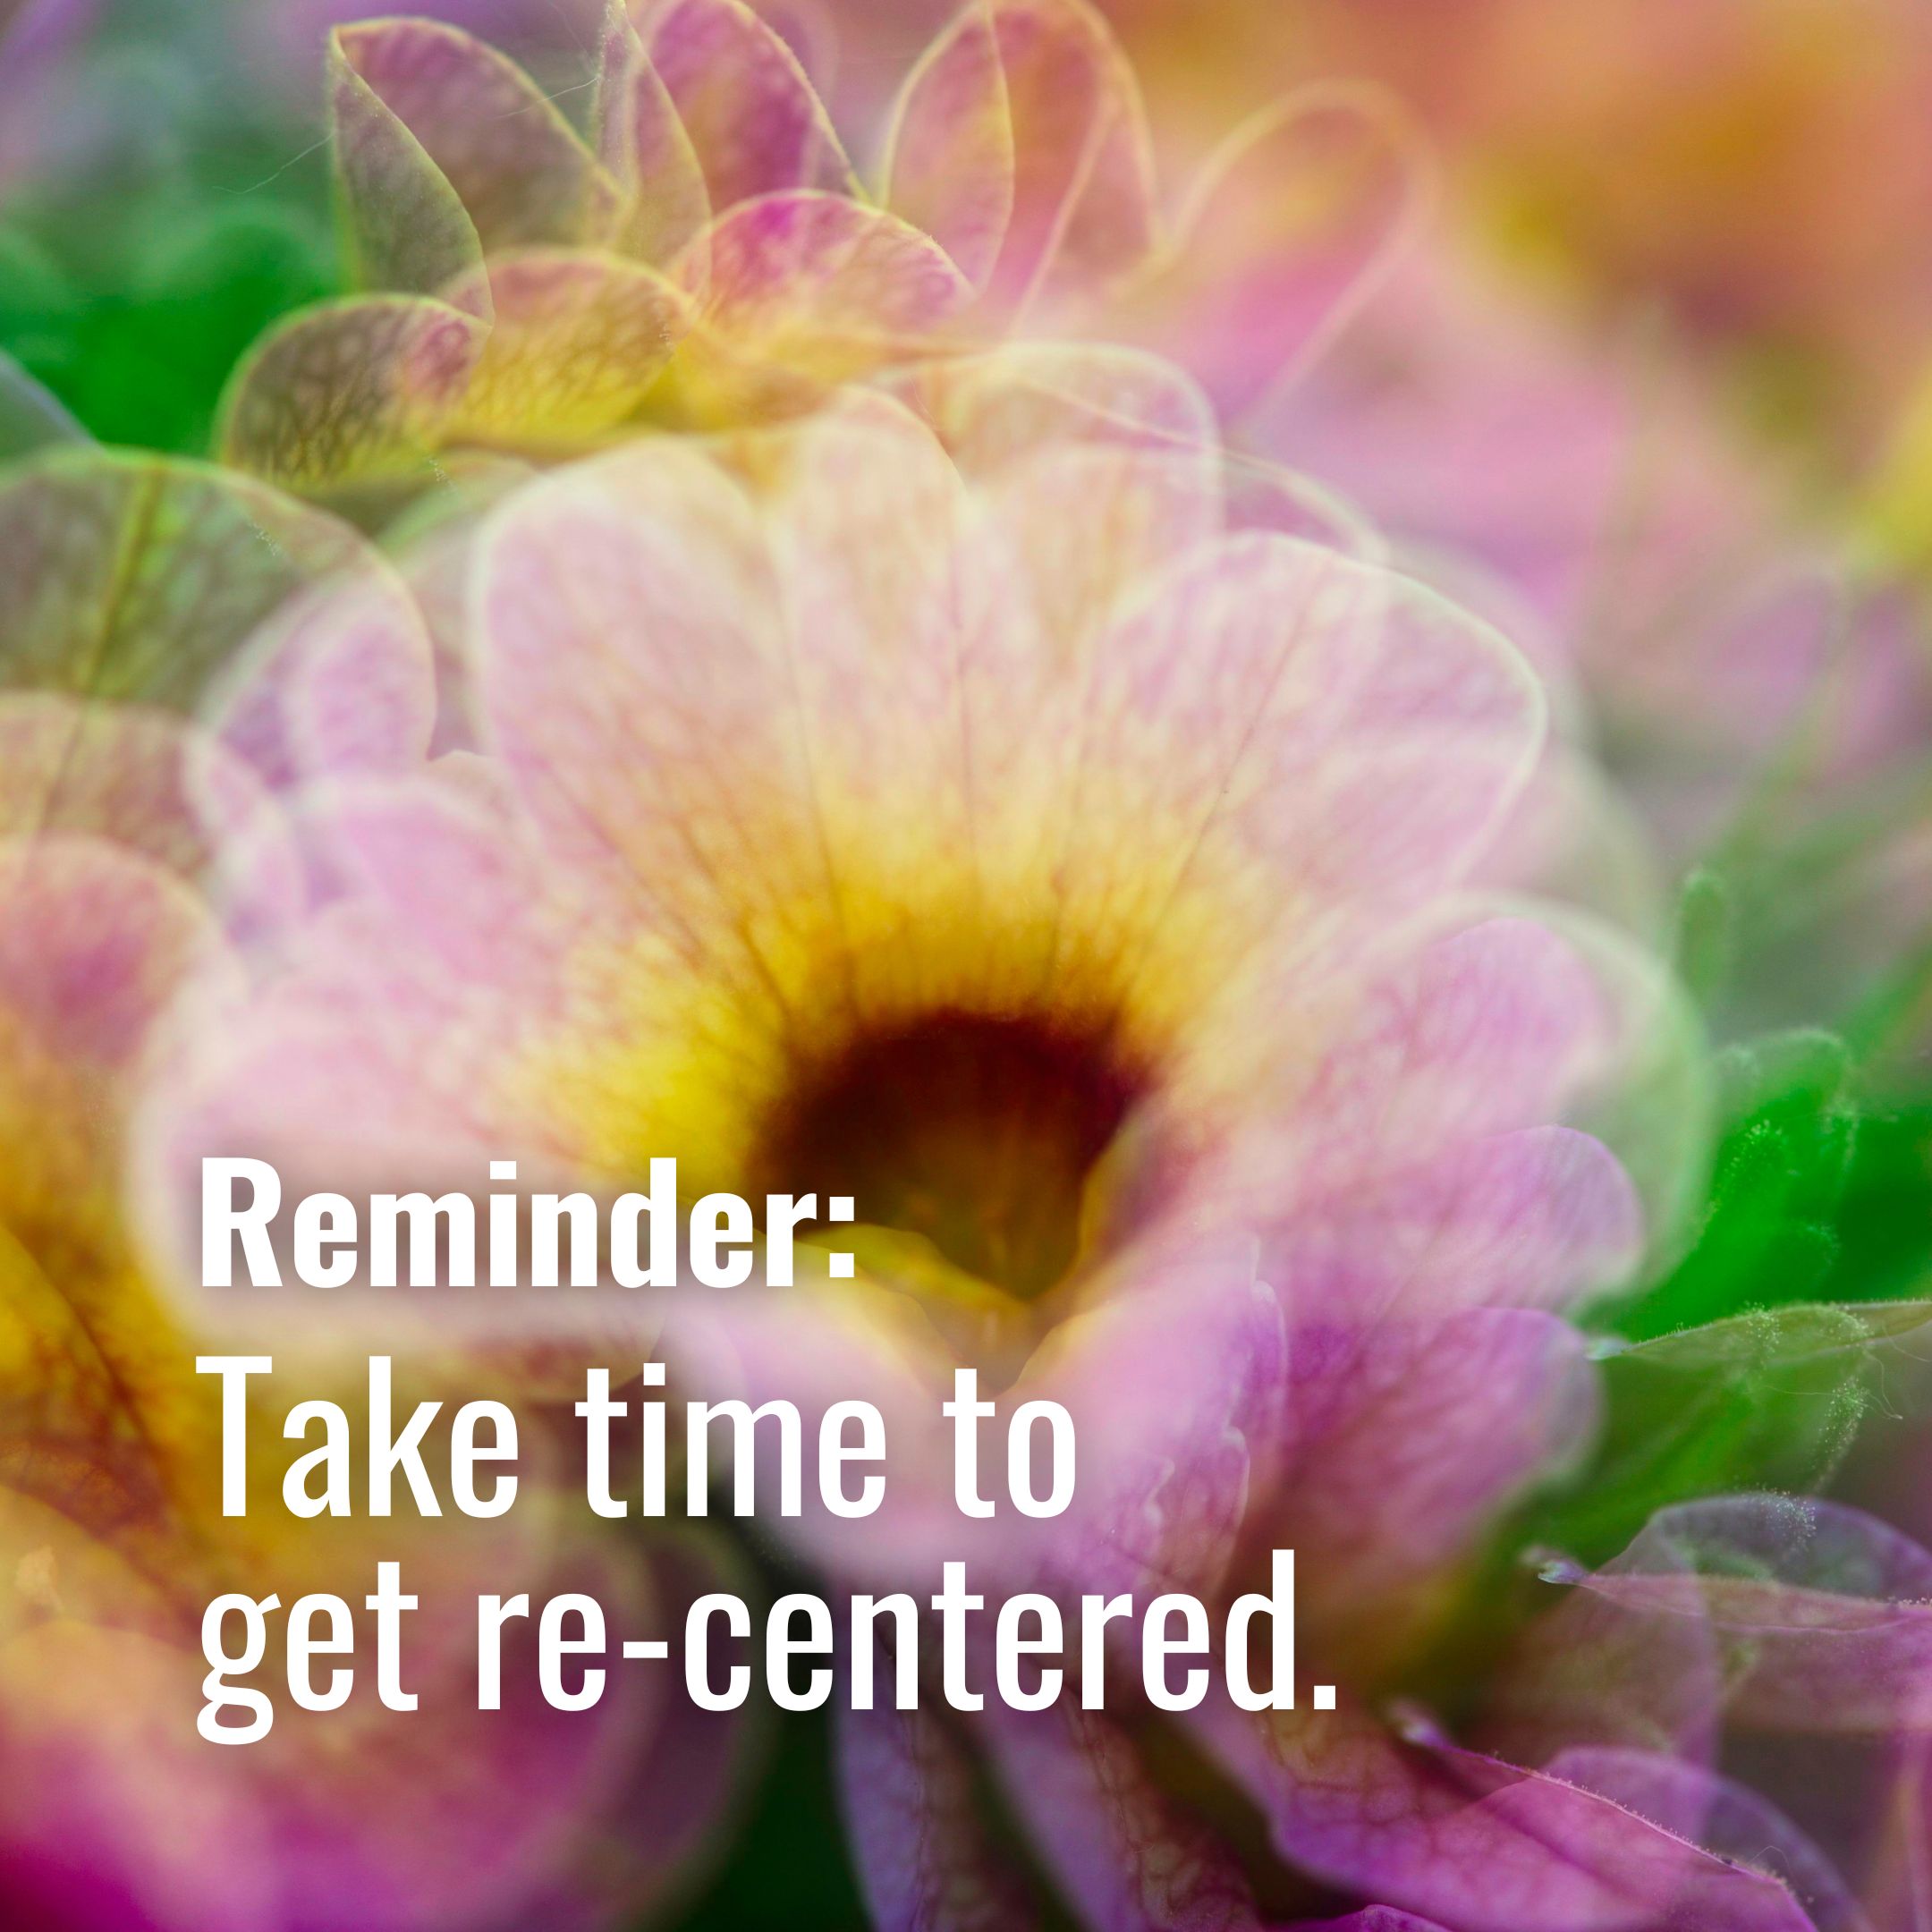 Take time to get re-centered.